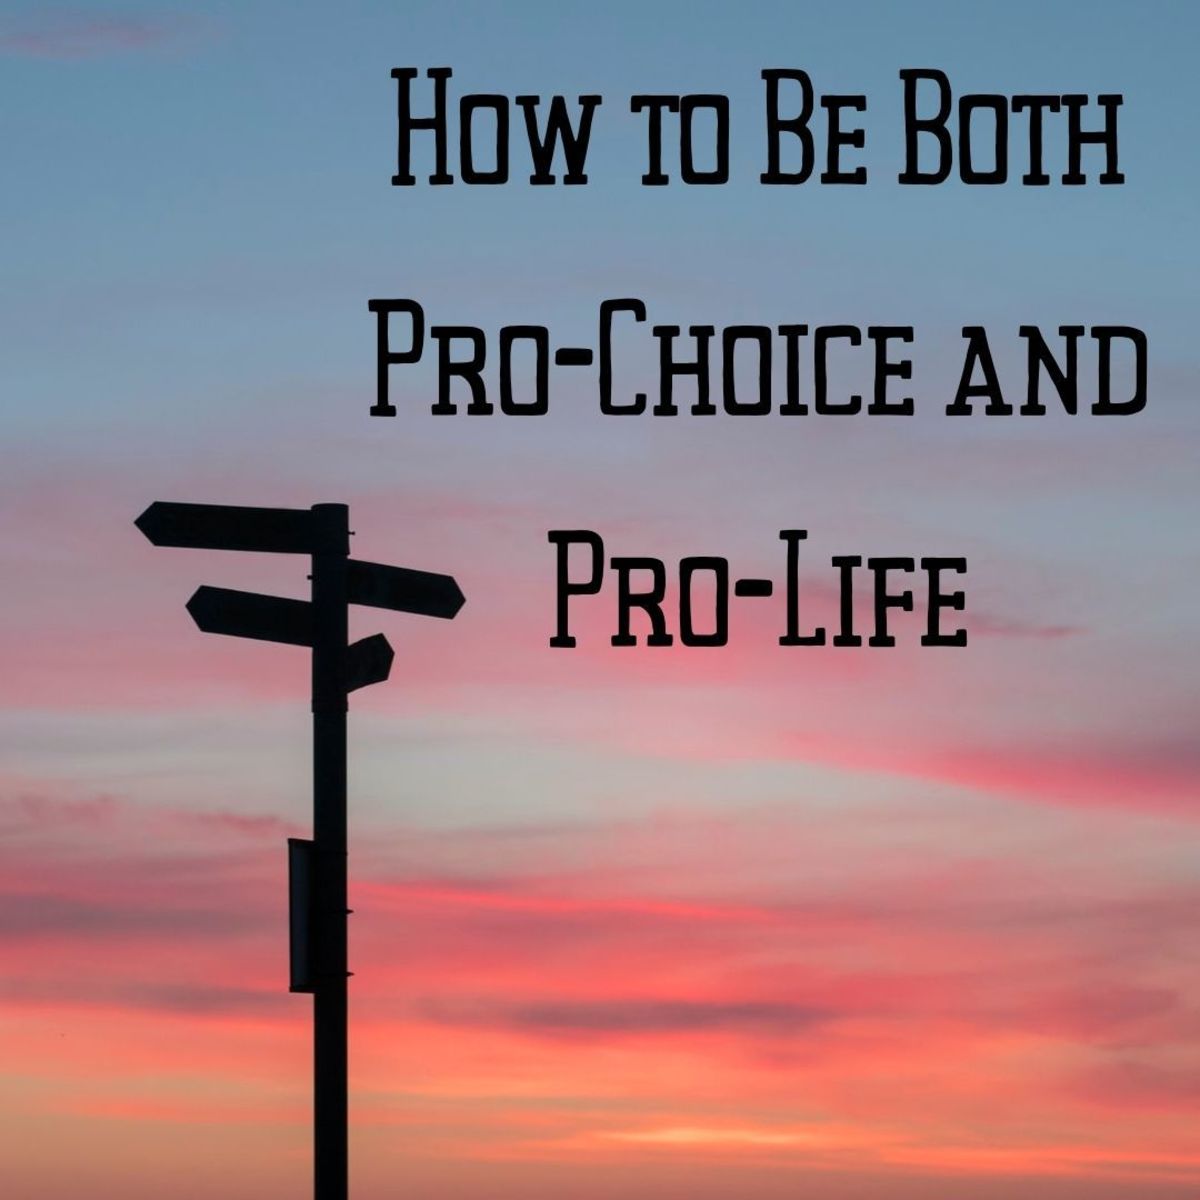 How to Be Both Pro-Life and Pro-Choice